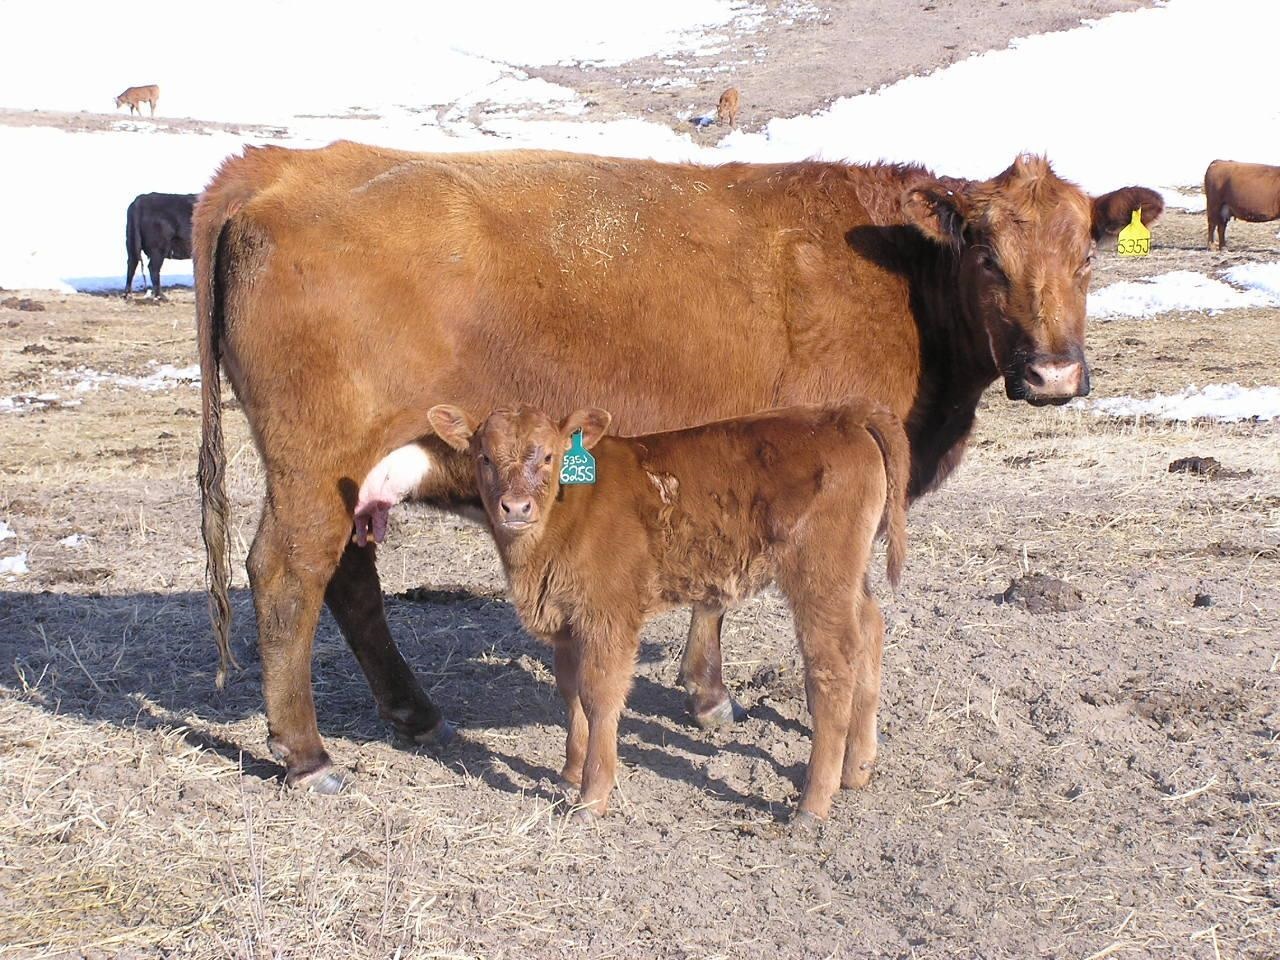 Selecting Replacement Heifers Based on Birth Date and Age of Dam | UNL Beef